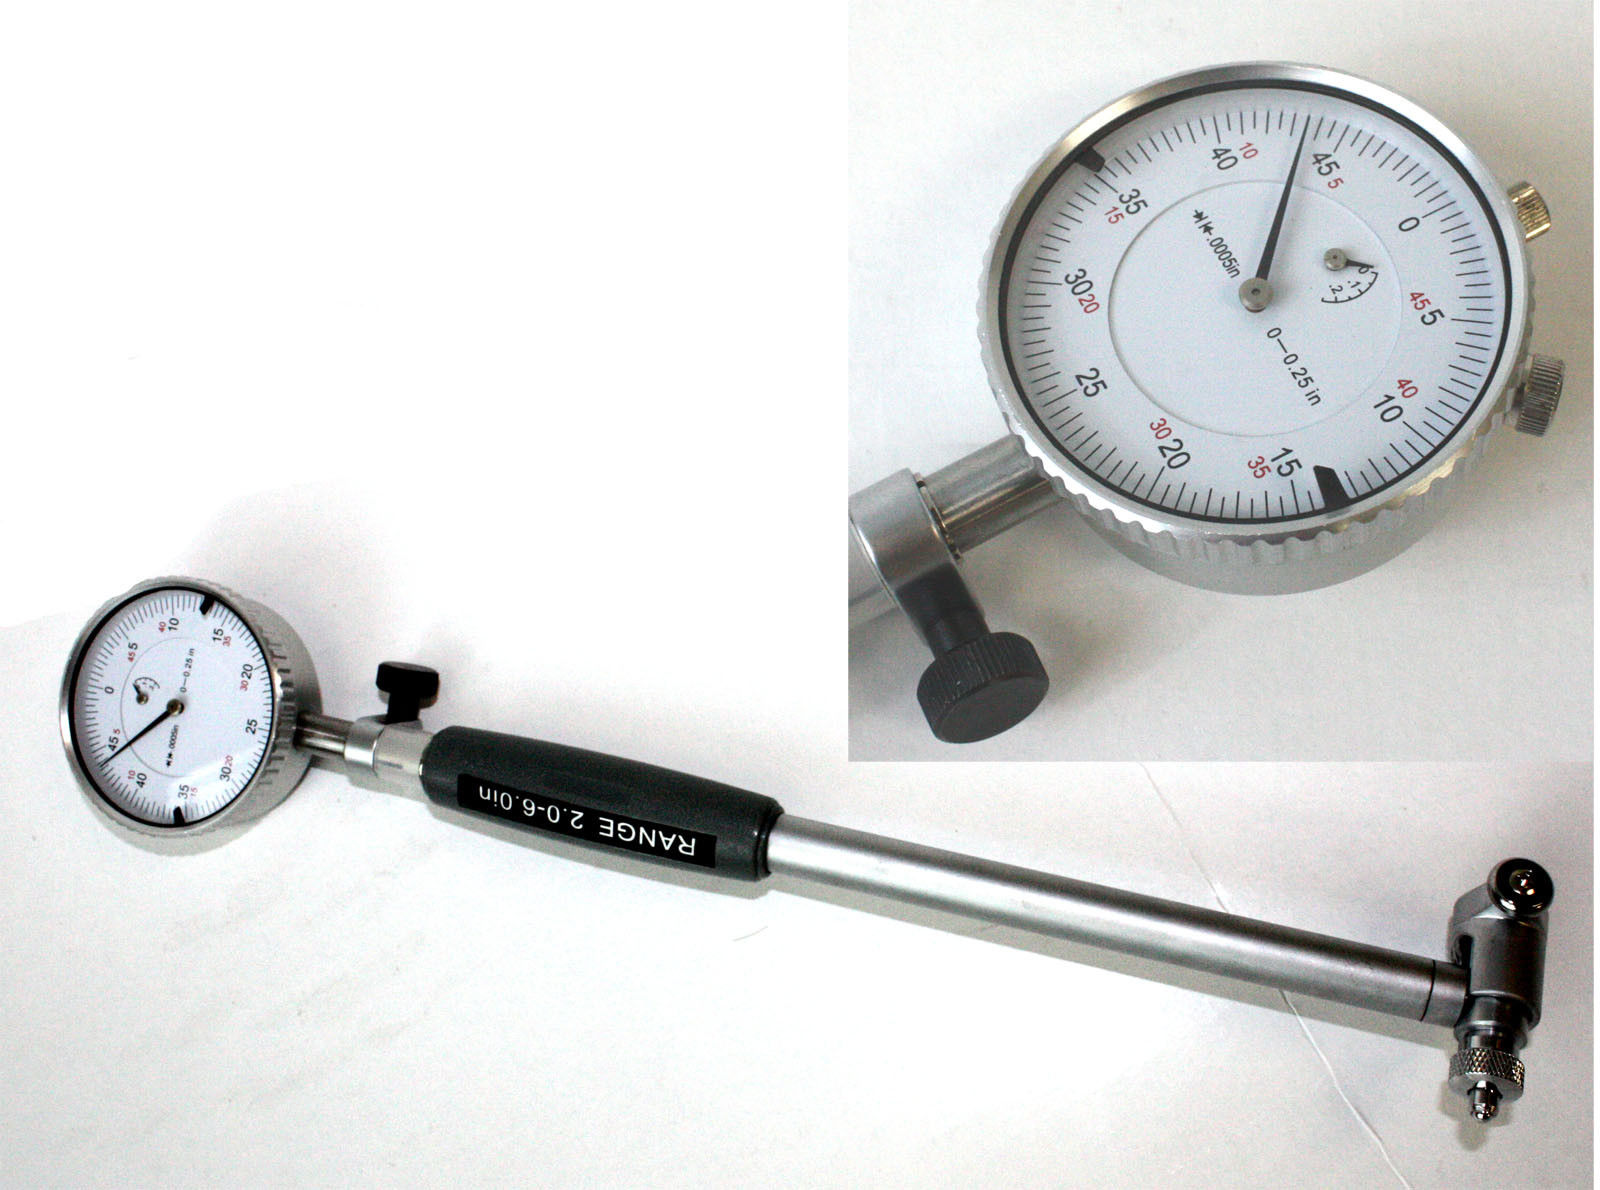 ENGINE CYLINDER 2" to 6" DIAL BORE GAUGE GAGE INDICATOR RESOLUTION 0.0005" 